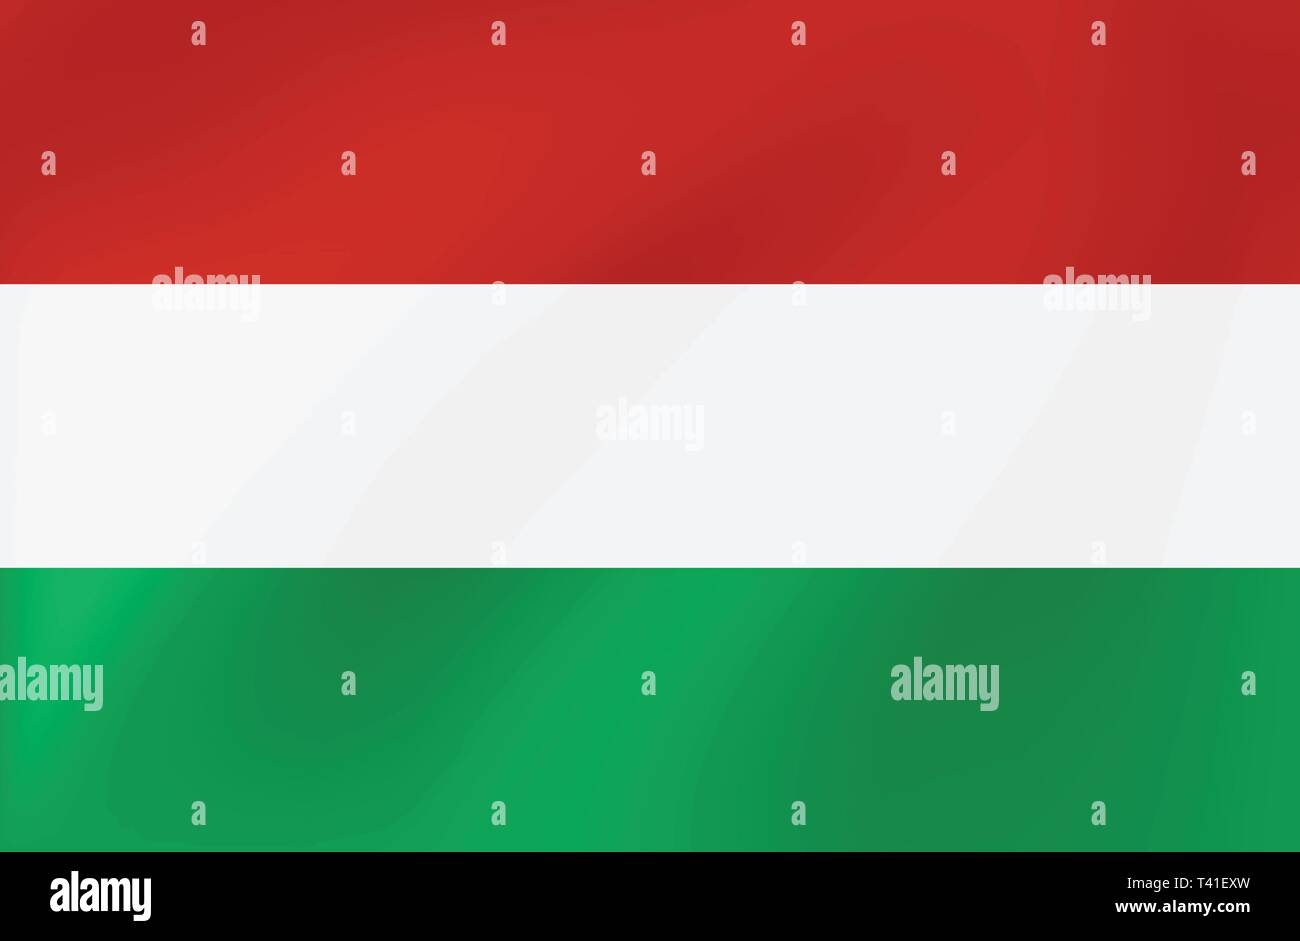 Vector national flag of Hungary. Illustration for sports competition, traditional or state events. Stock Vector